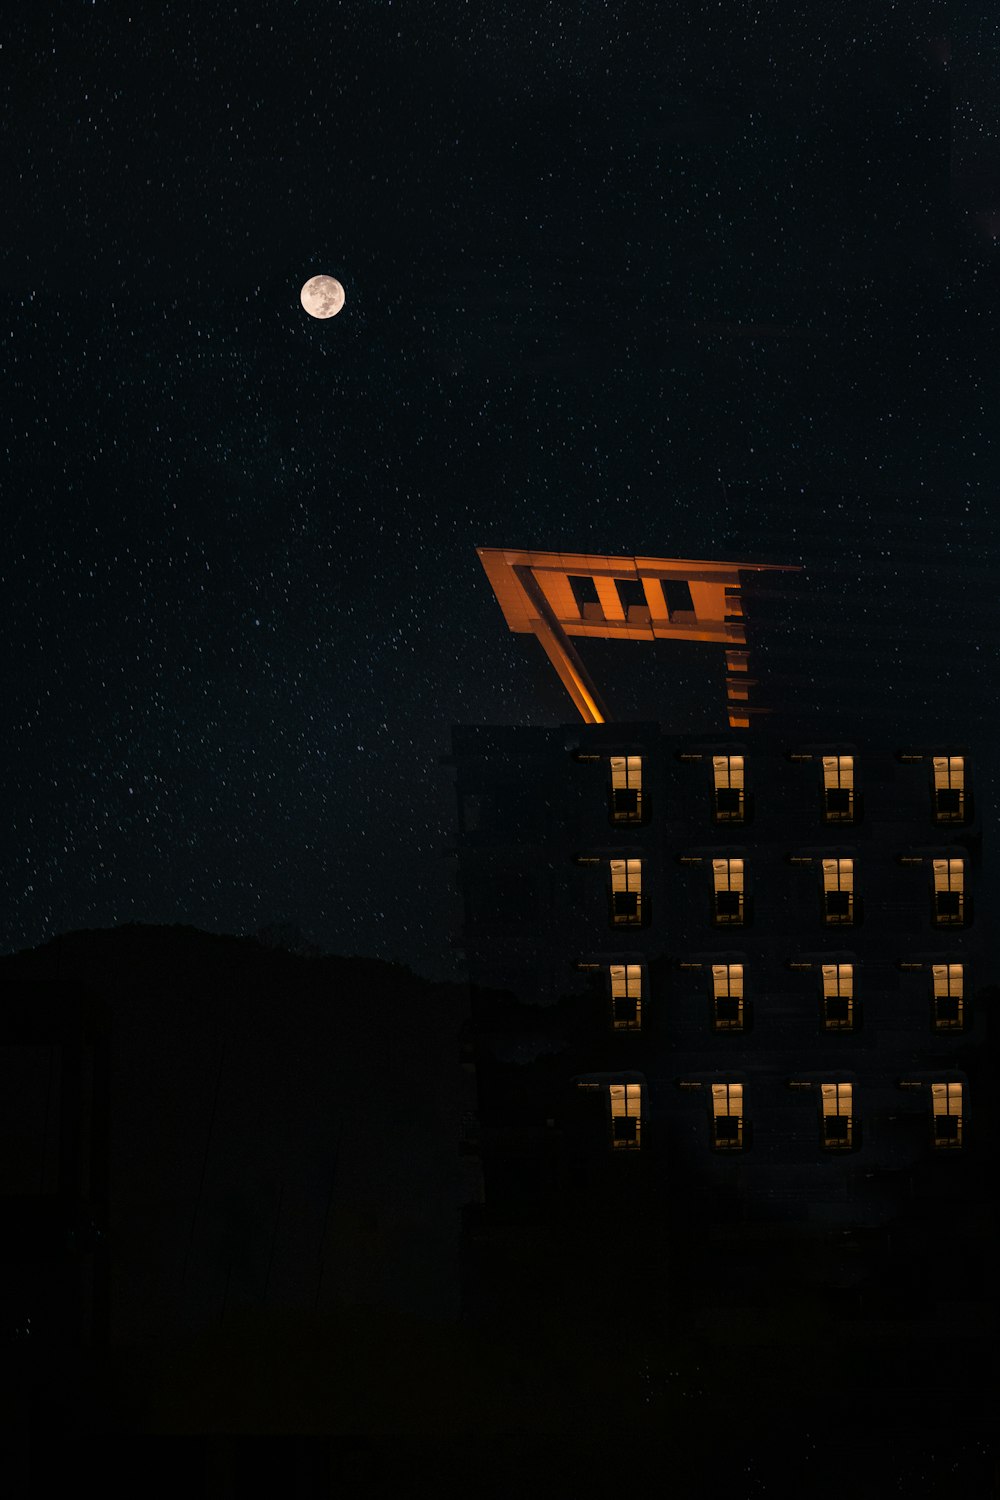 a building is lit up at night with the moon in the sky